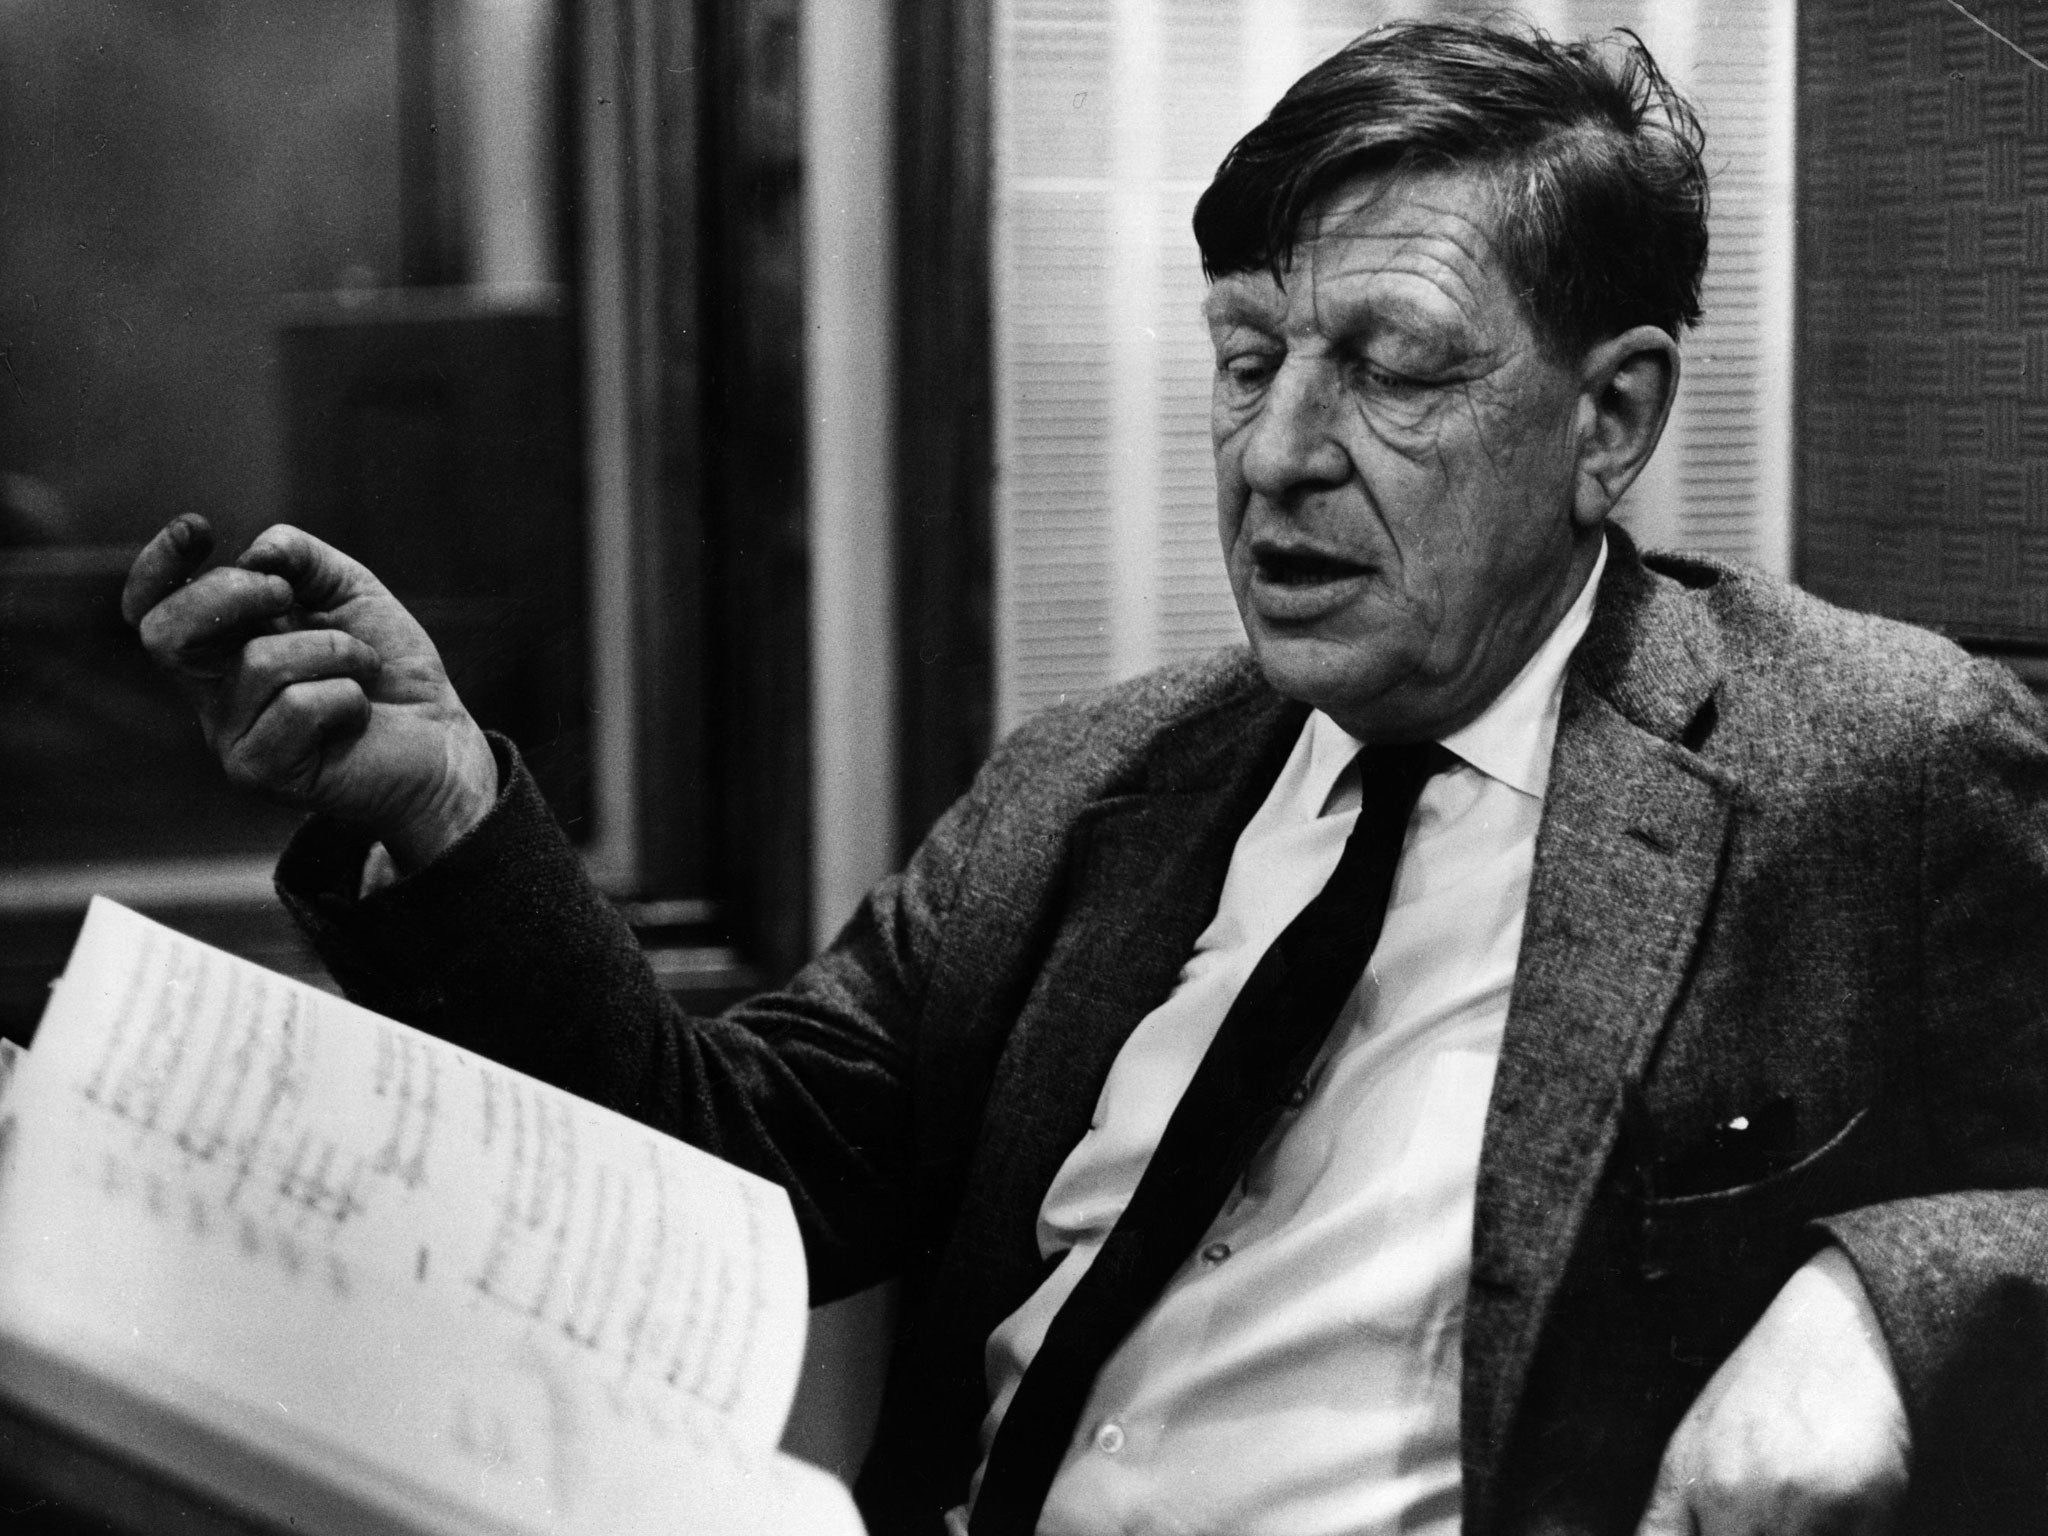 The journal is one of only three kept by Auden, seen here in 1960